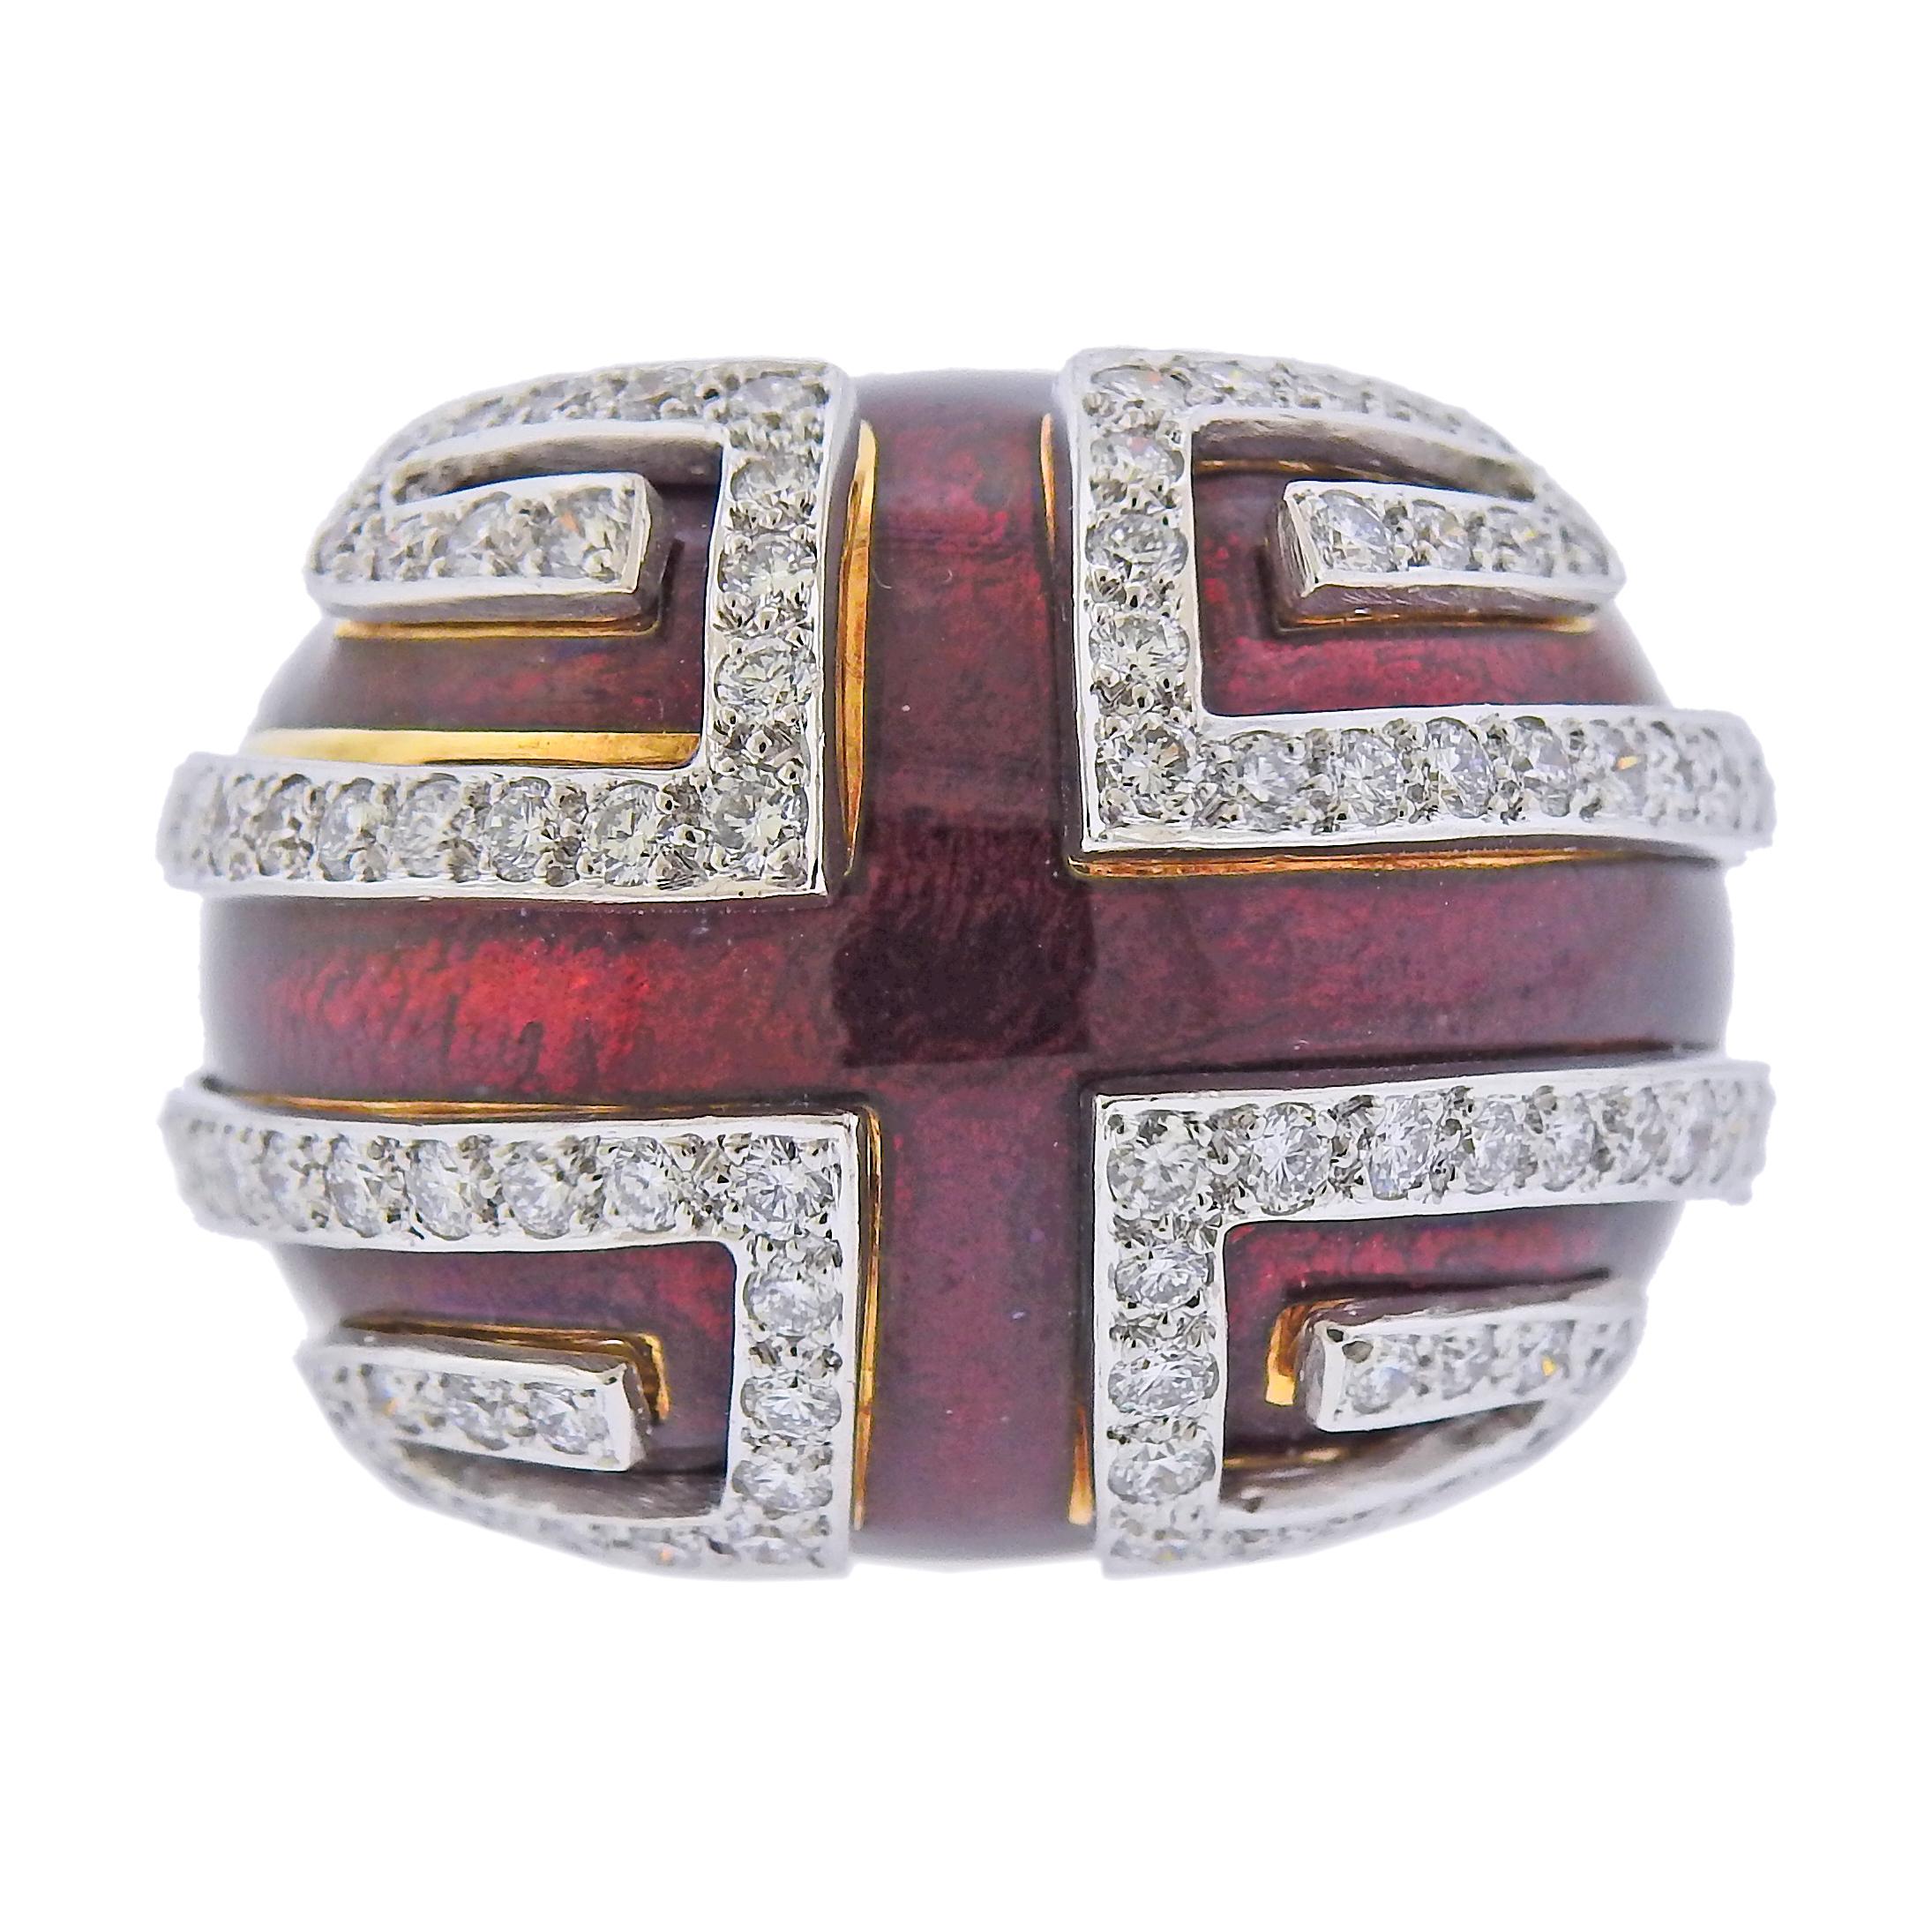 18k gold and platinum Scroll ring by David Webb, with red enamel and approx. 1.50cts in H/VS-SI1 diamonds.  Ring size - 6, ring top is 24mm wide, sits approx. 15mm from the finger.  Weight - 33.3 grams. Marked: David Webb, 18k, 900PT, GS508.